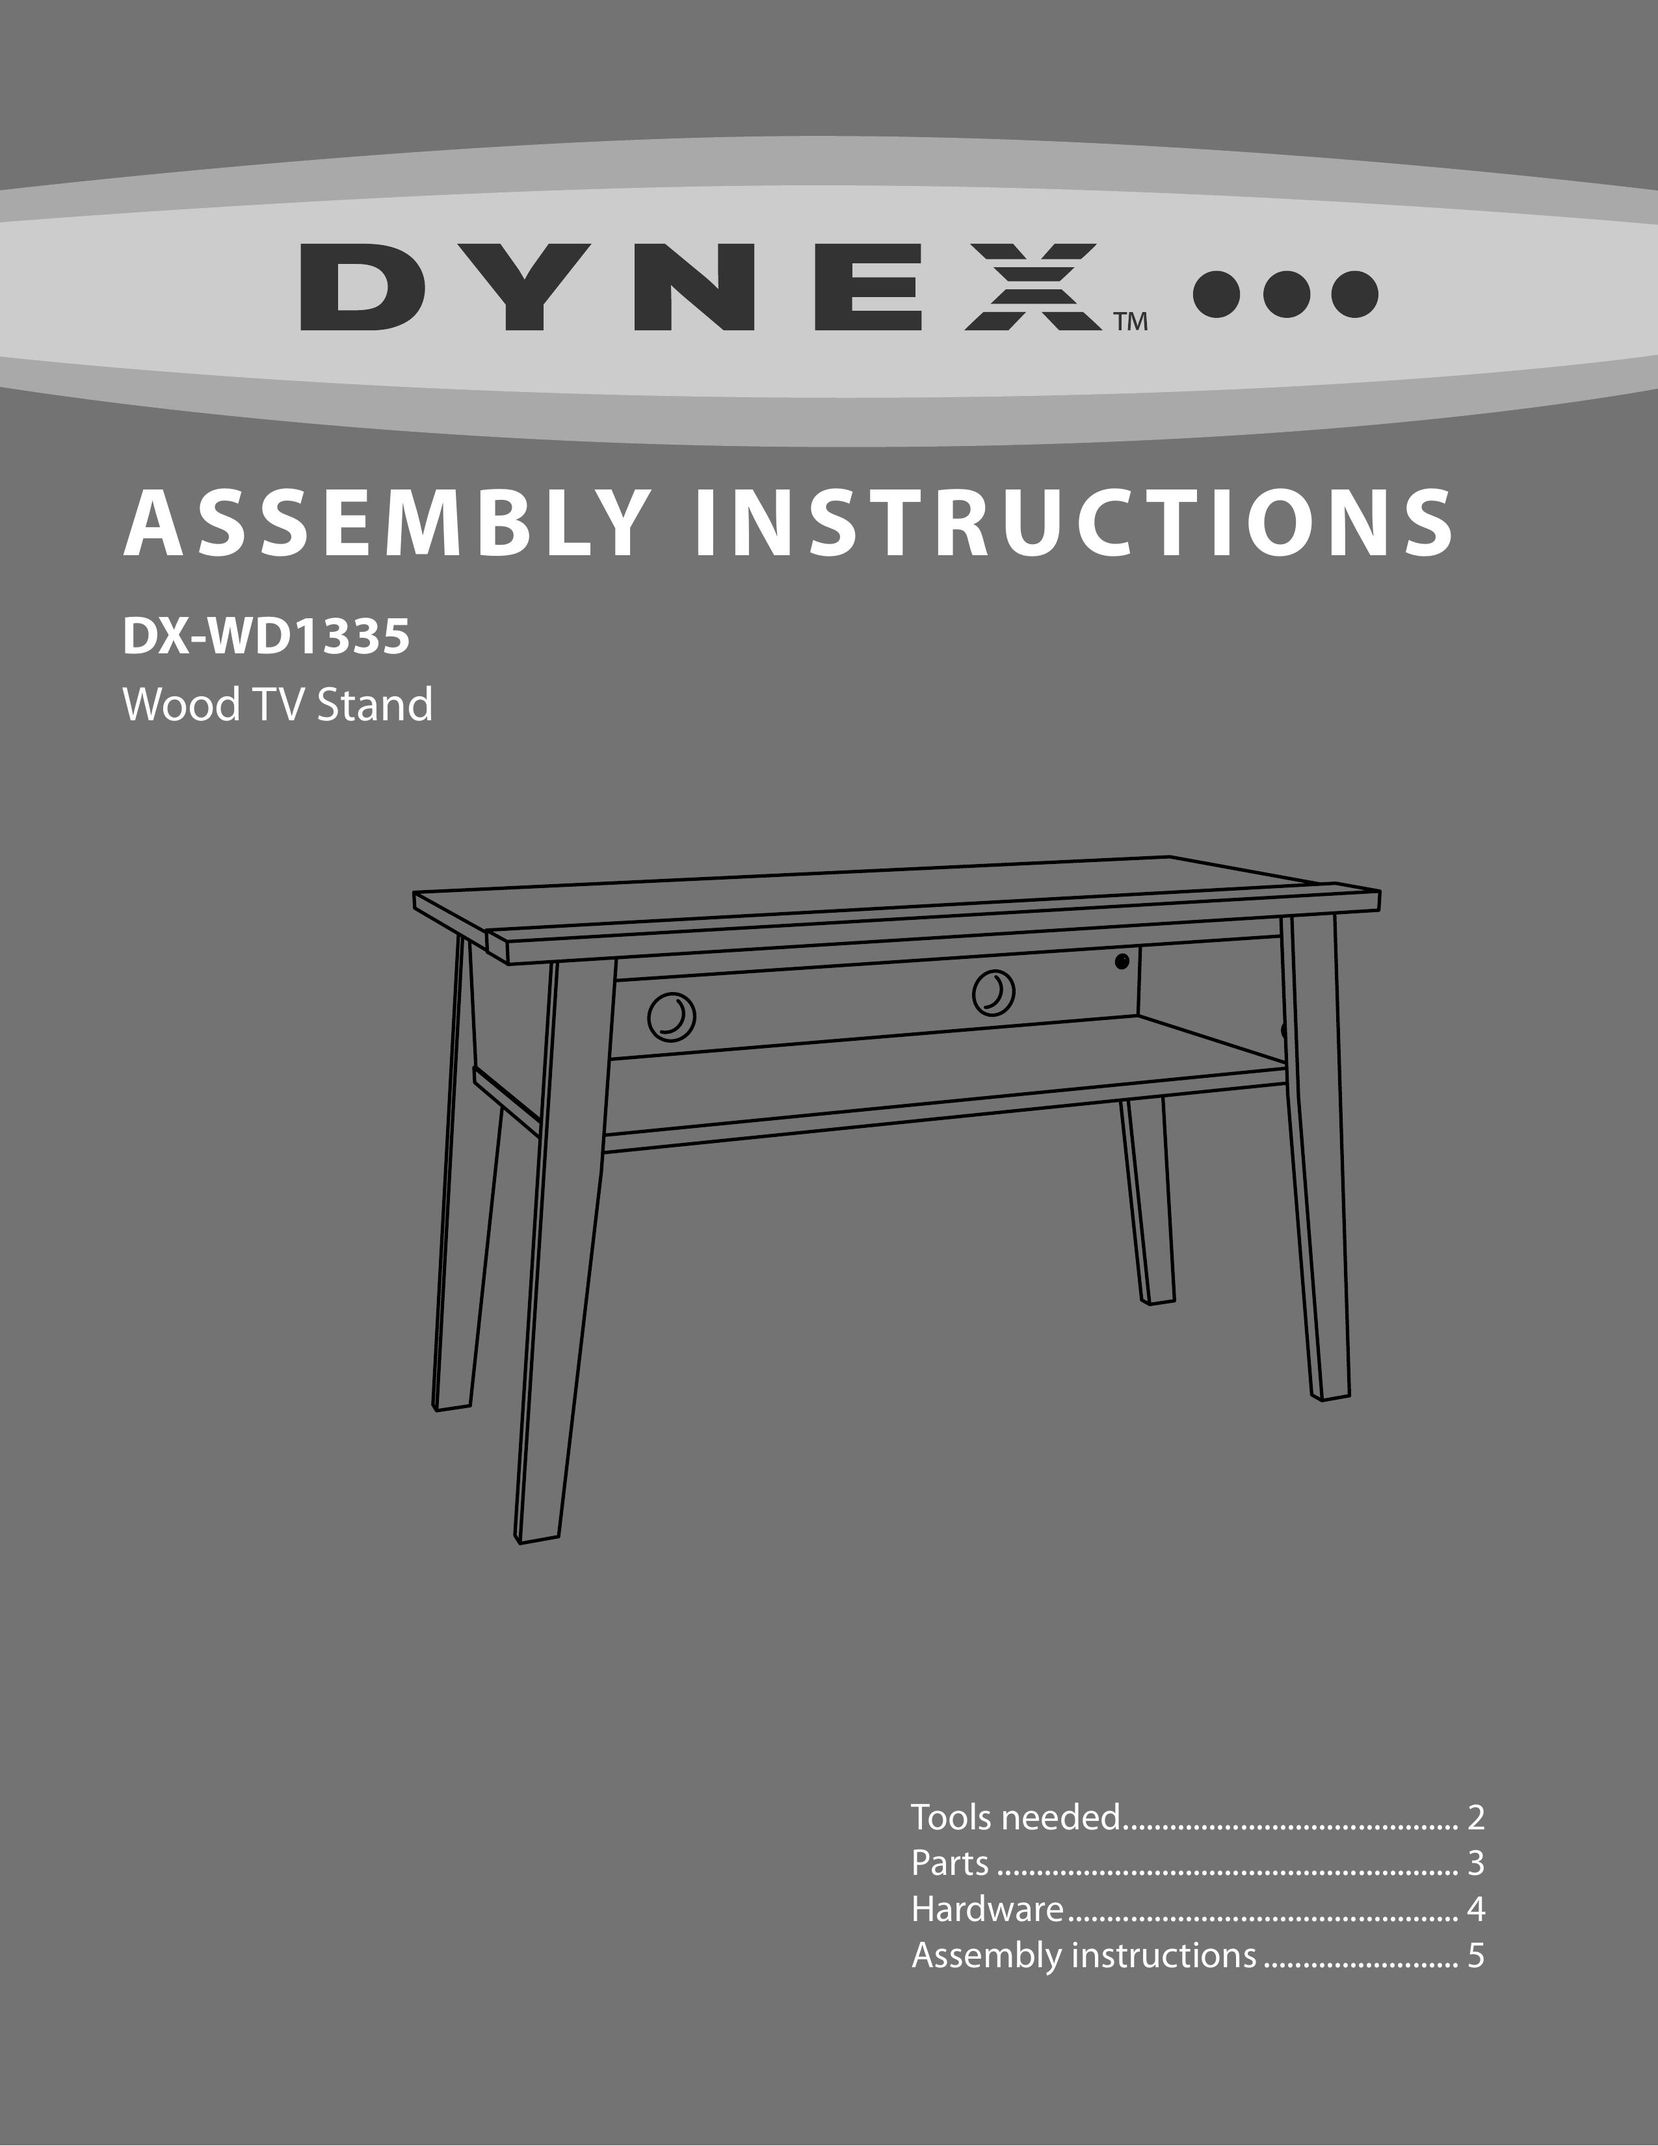 Dynex DX-WD1335 TV Video Accessories User Manual